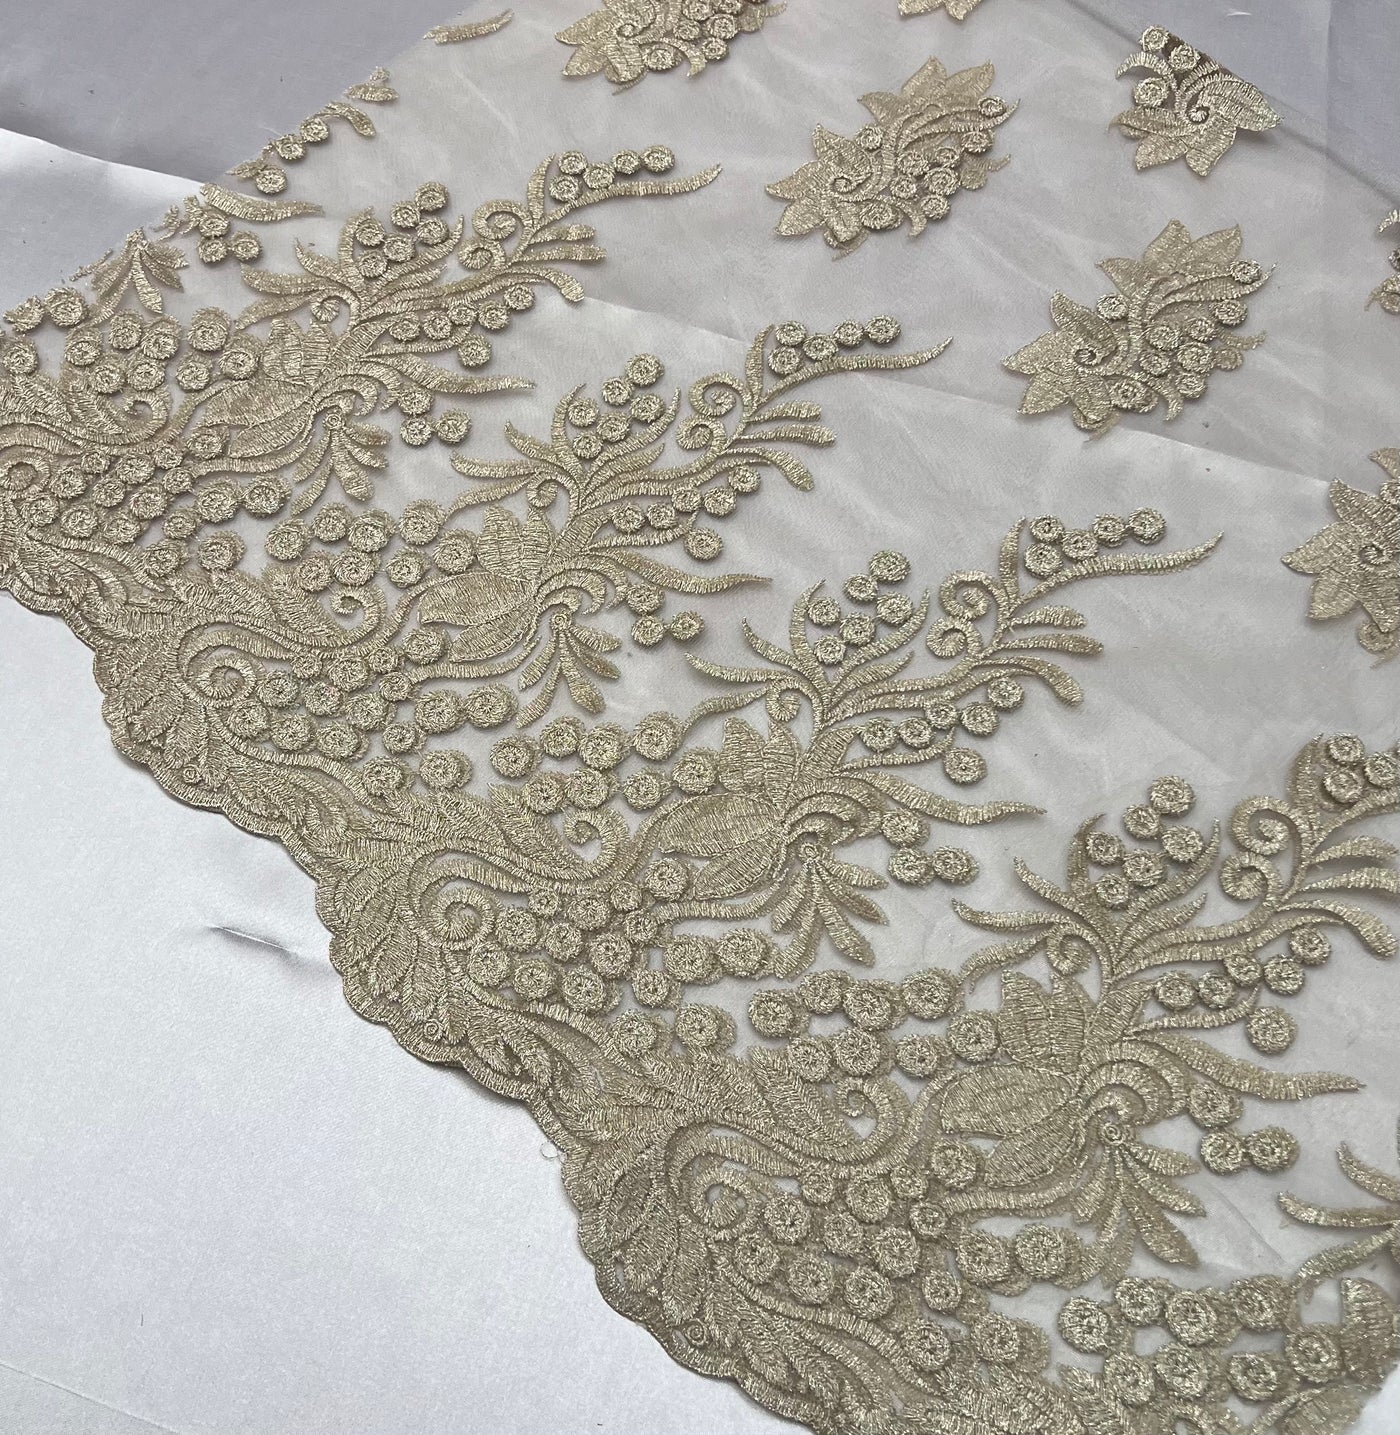 French Lace Fabric Top Quality Luxurious French Lace Bridal Tulle Lace Fabrics For Party/Wedding Dresses Lace Fabrics 1 Metre